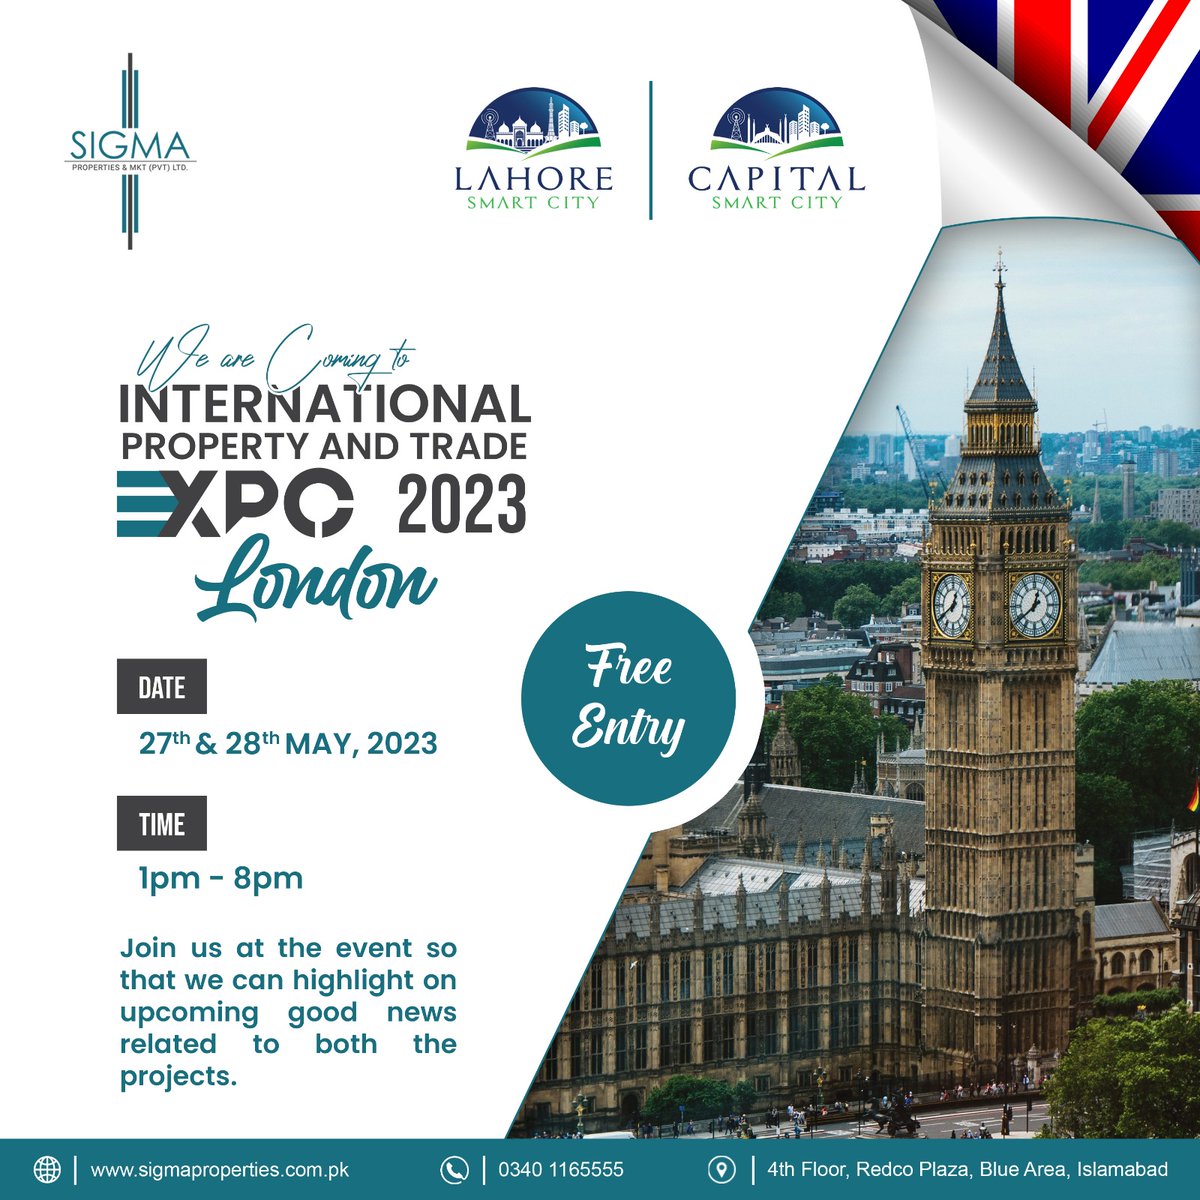 Join International Property and Trade Expo 2023 in London on the 27th and 28th of May, and explore more good news about Capital Smart City and Lahore Smart City
#International #Property #Trade #Expo2023 #London #27thand28thMay #explore #goodnews #CapitalSmartCity #LahoreSmartCity